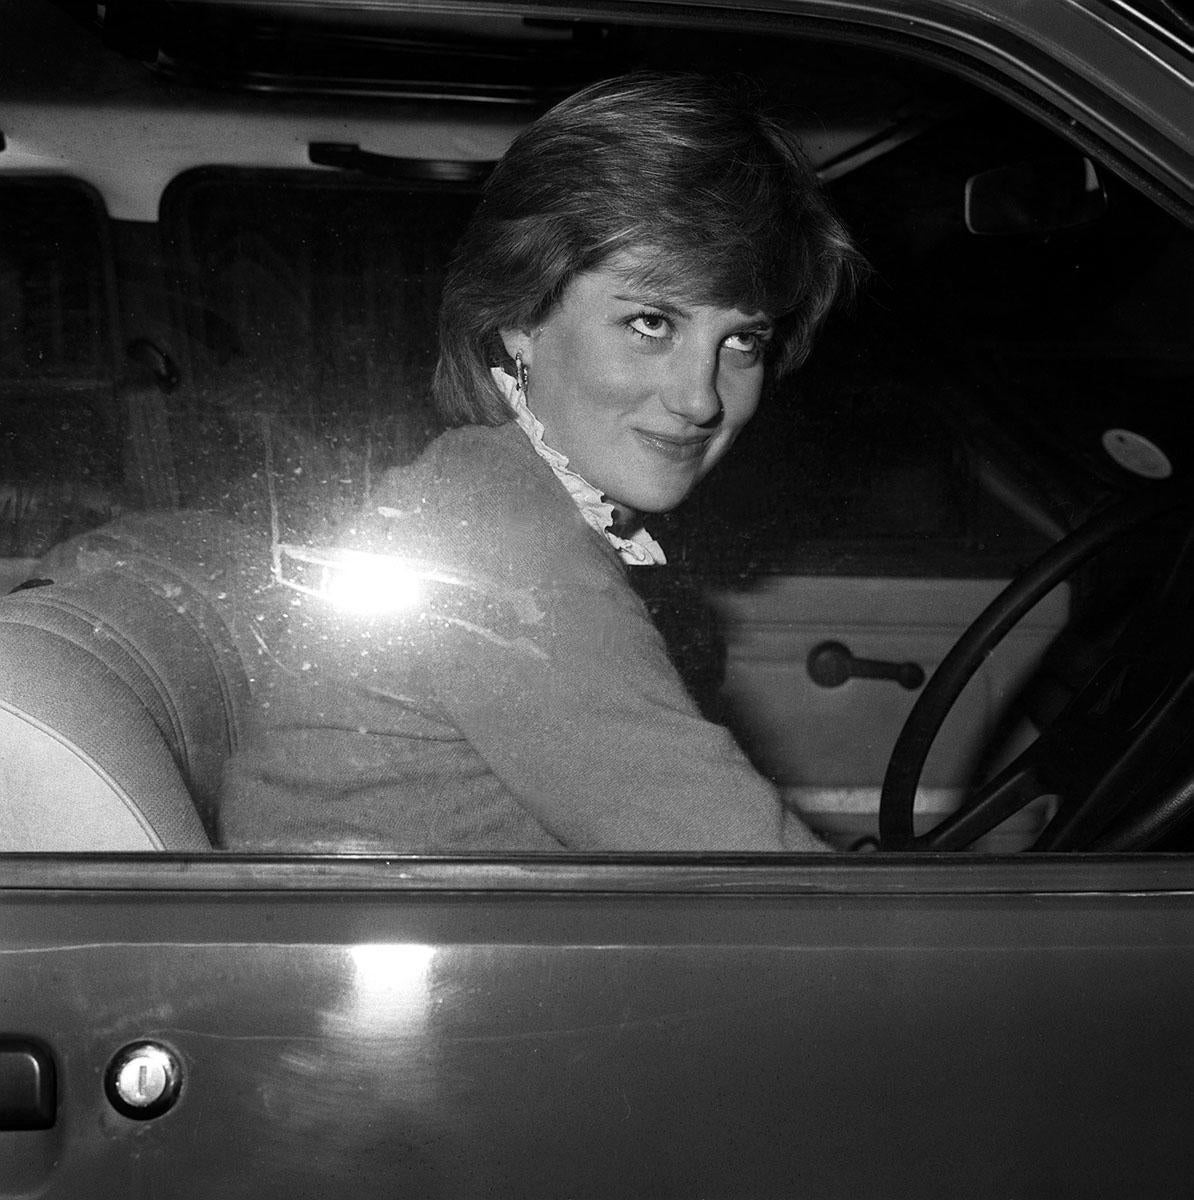 Lady Diana smiling at photographers after stalling her new car in in 1980 – amid mounting speculation over her relationship with the Prince of Wales (PA)